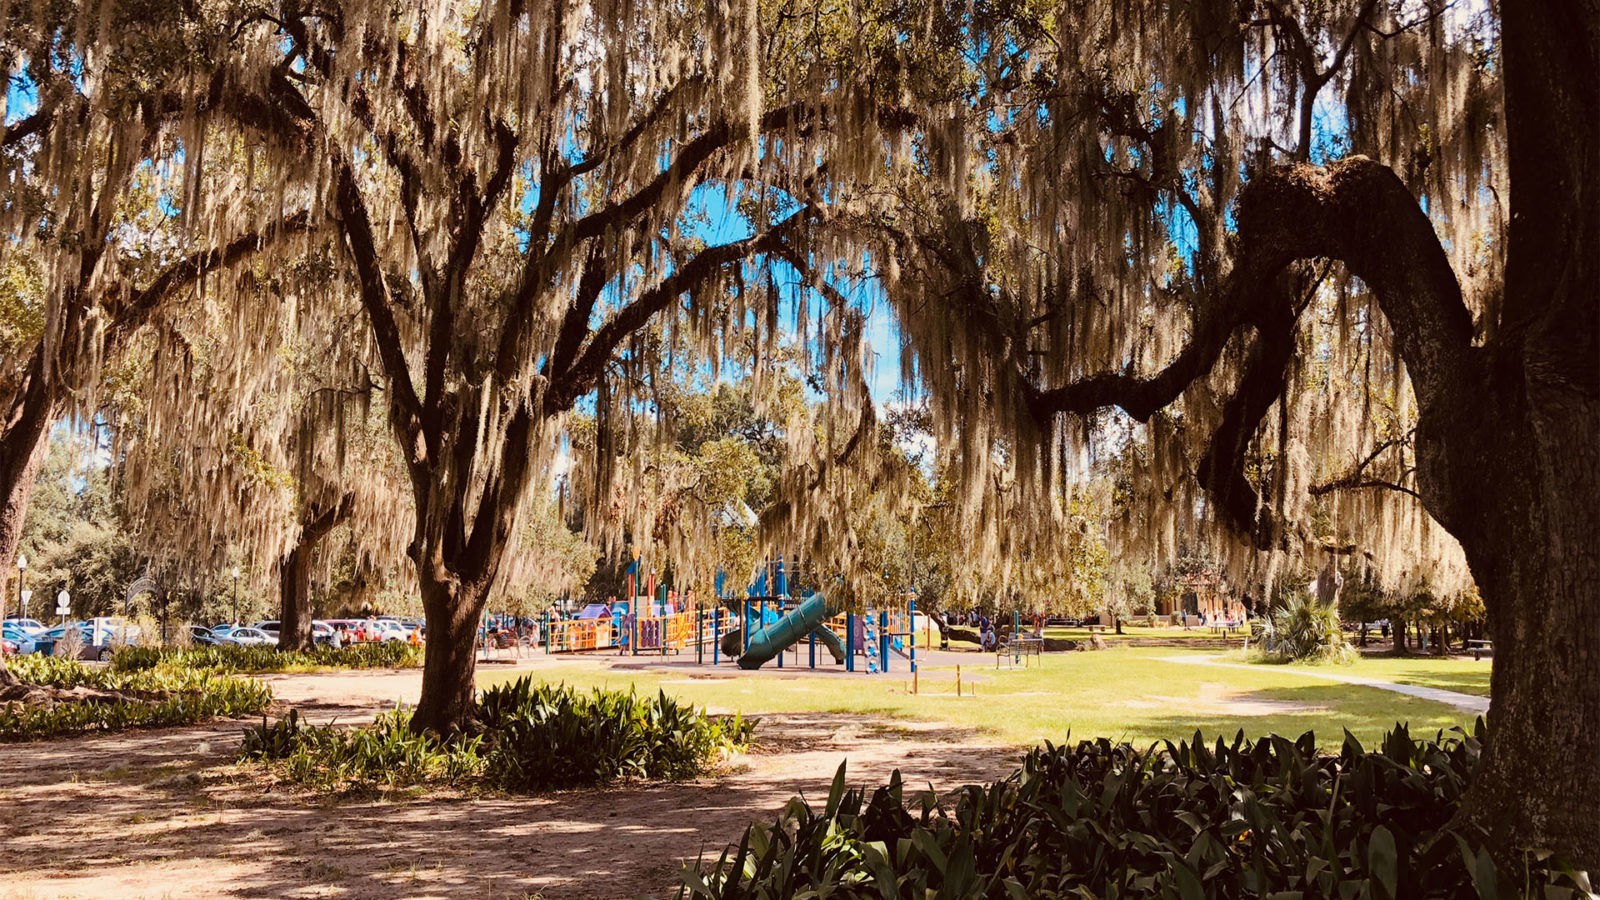 playground, trees, and lake in City Park of New Orleans